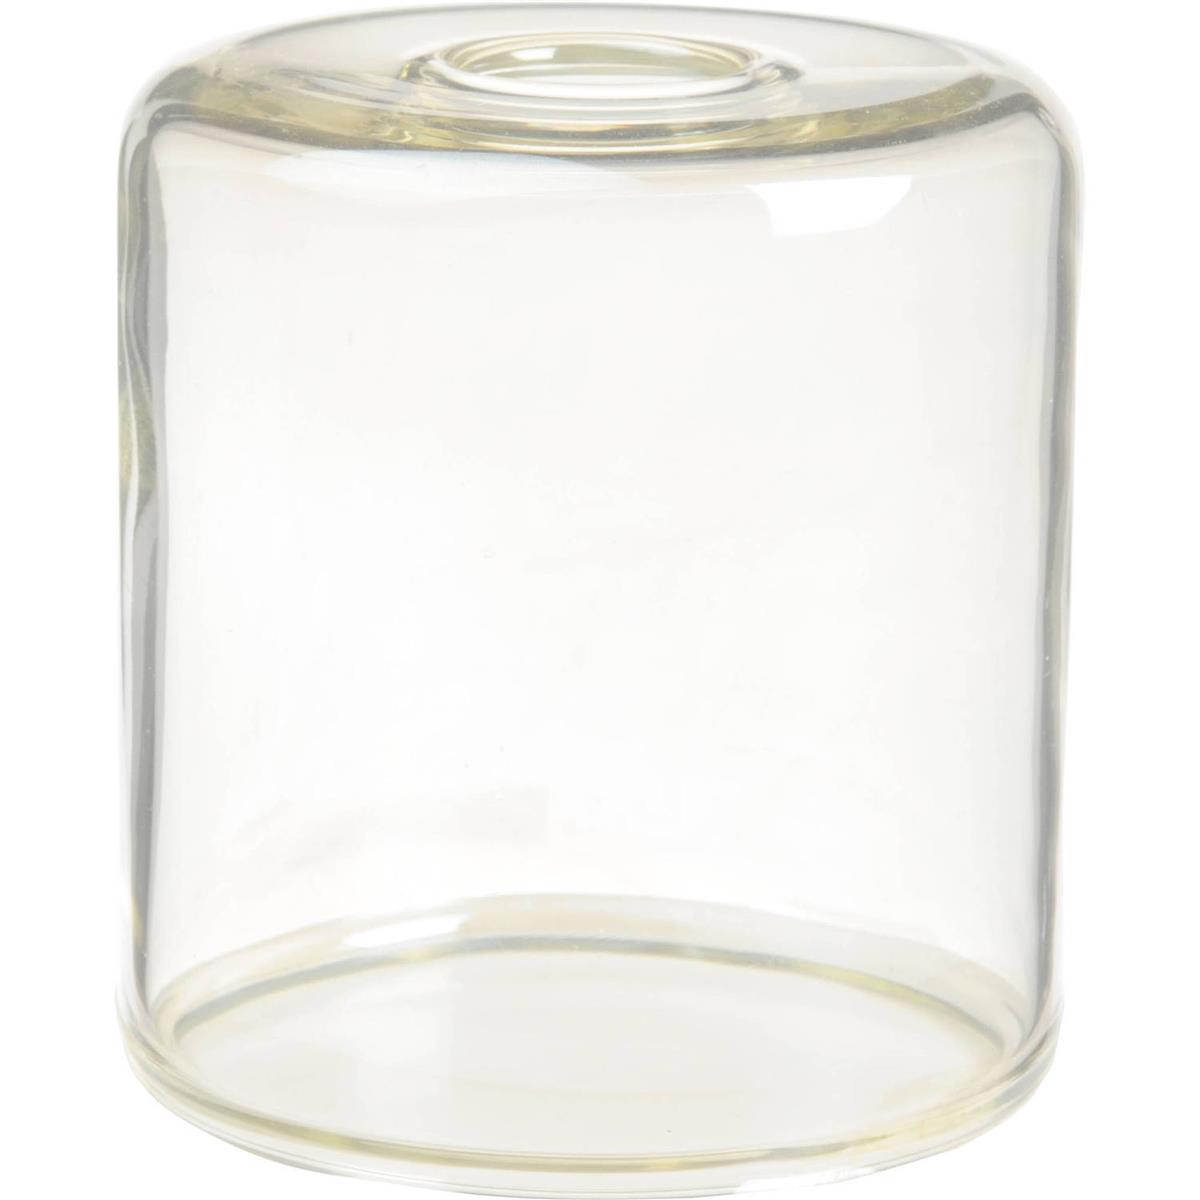 

Hensel Coated Clear Glass Dome for Integra Series Monolights